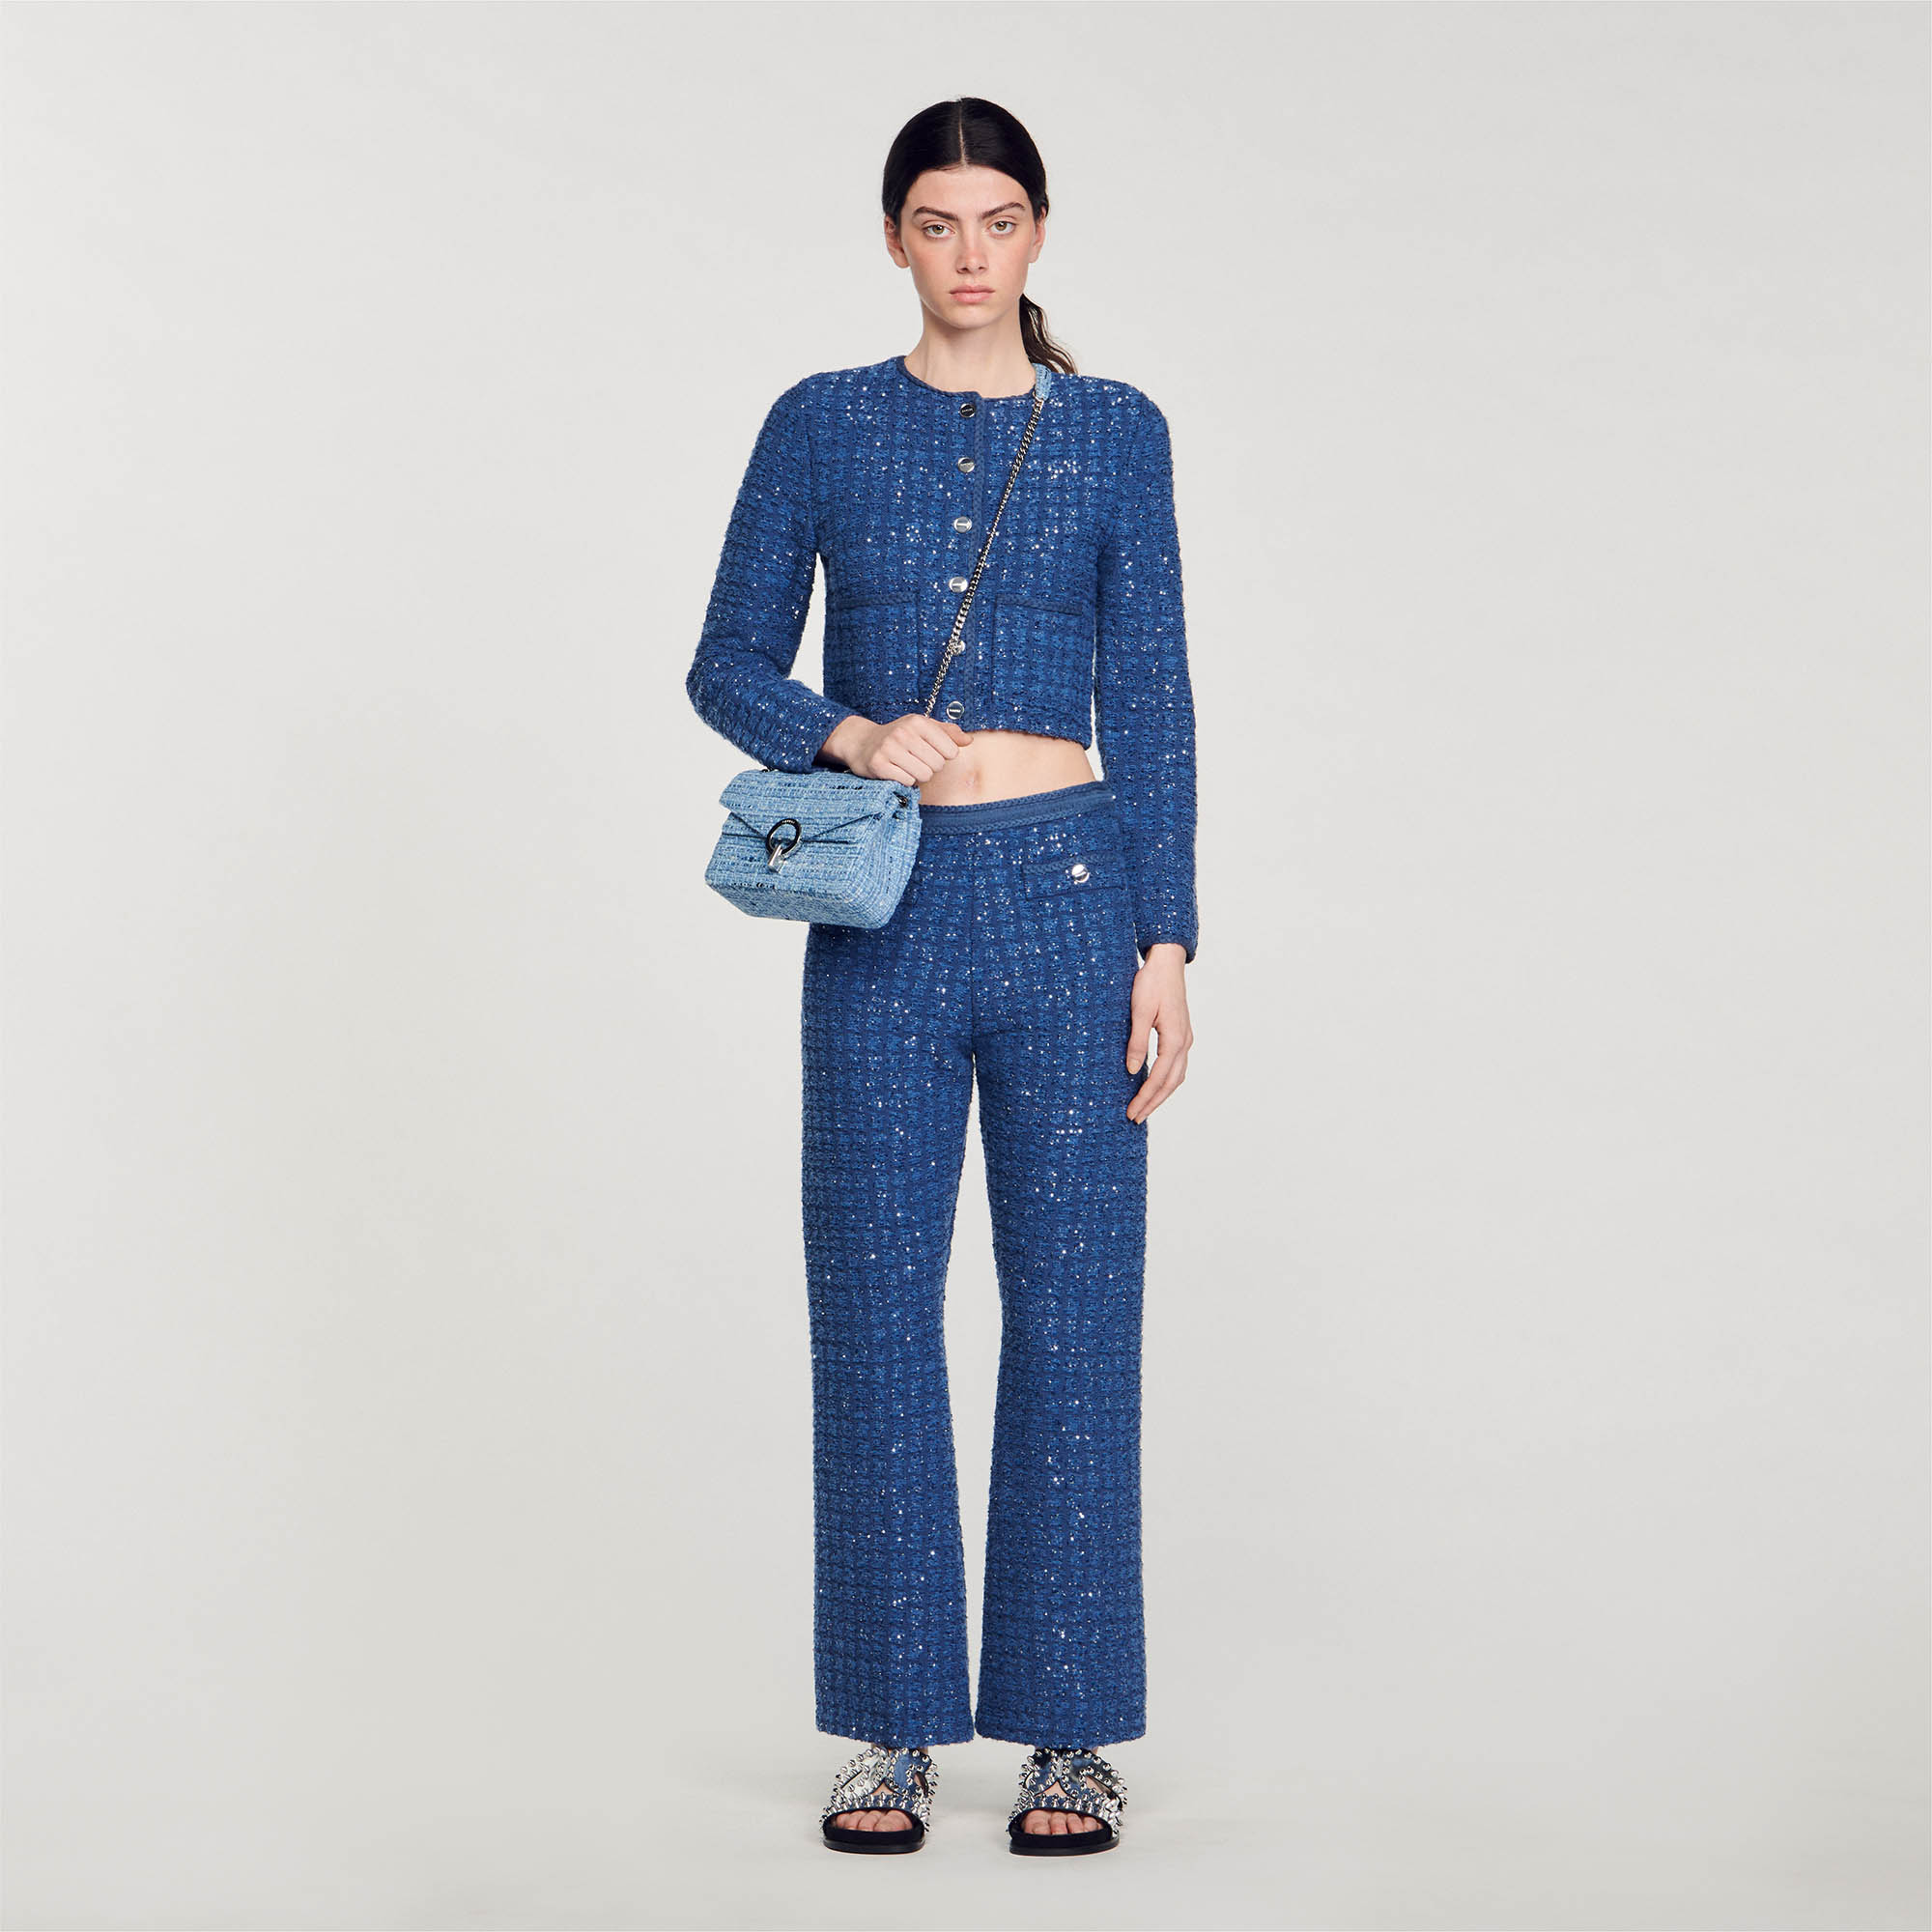 Sandro polyamide Short coatigan in a decorative knit with a glittering tweed effect, button fastening, braided ribbing and patch pockets at the waist